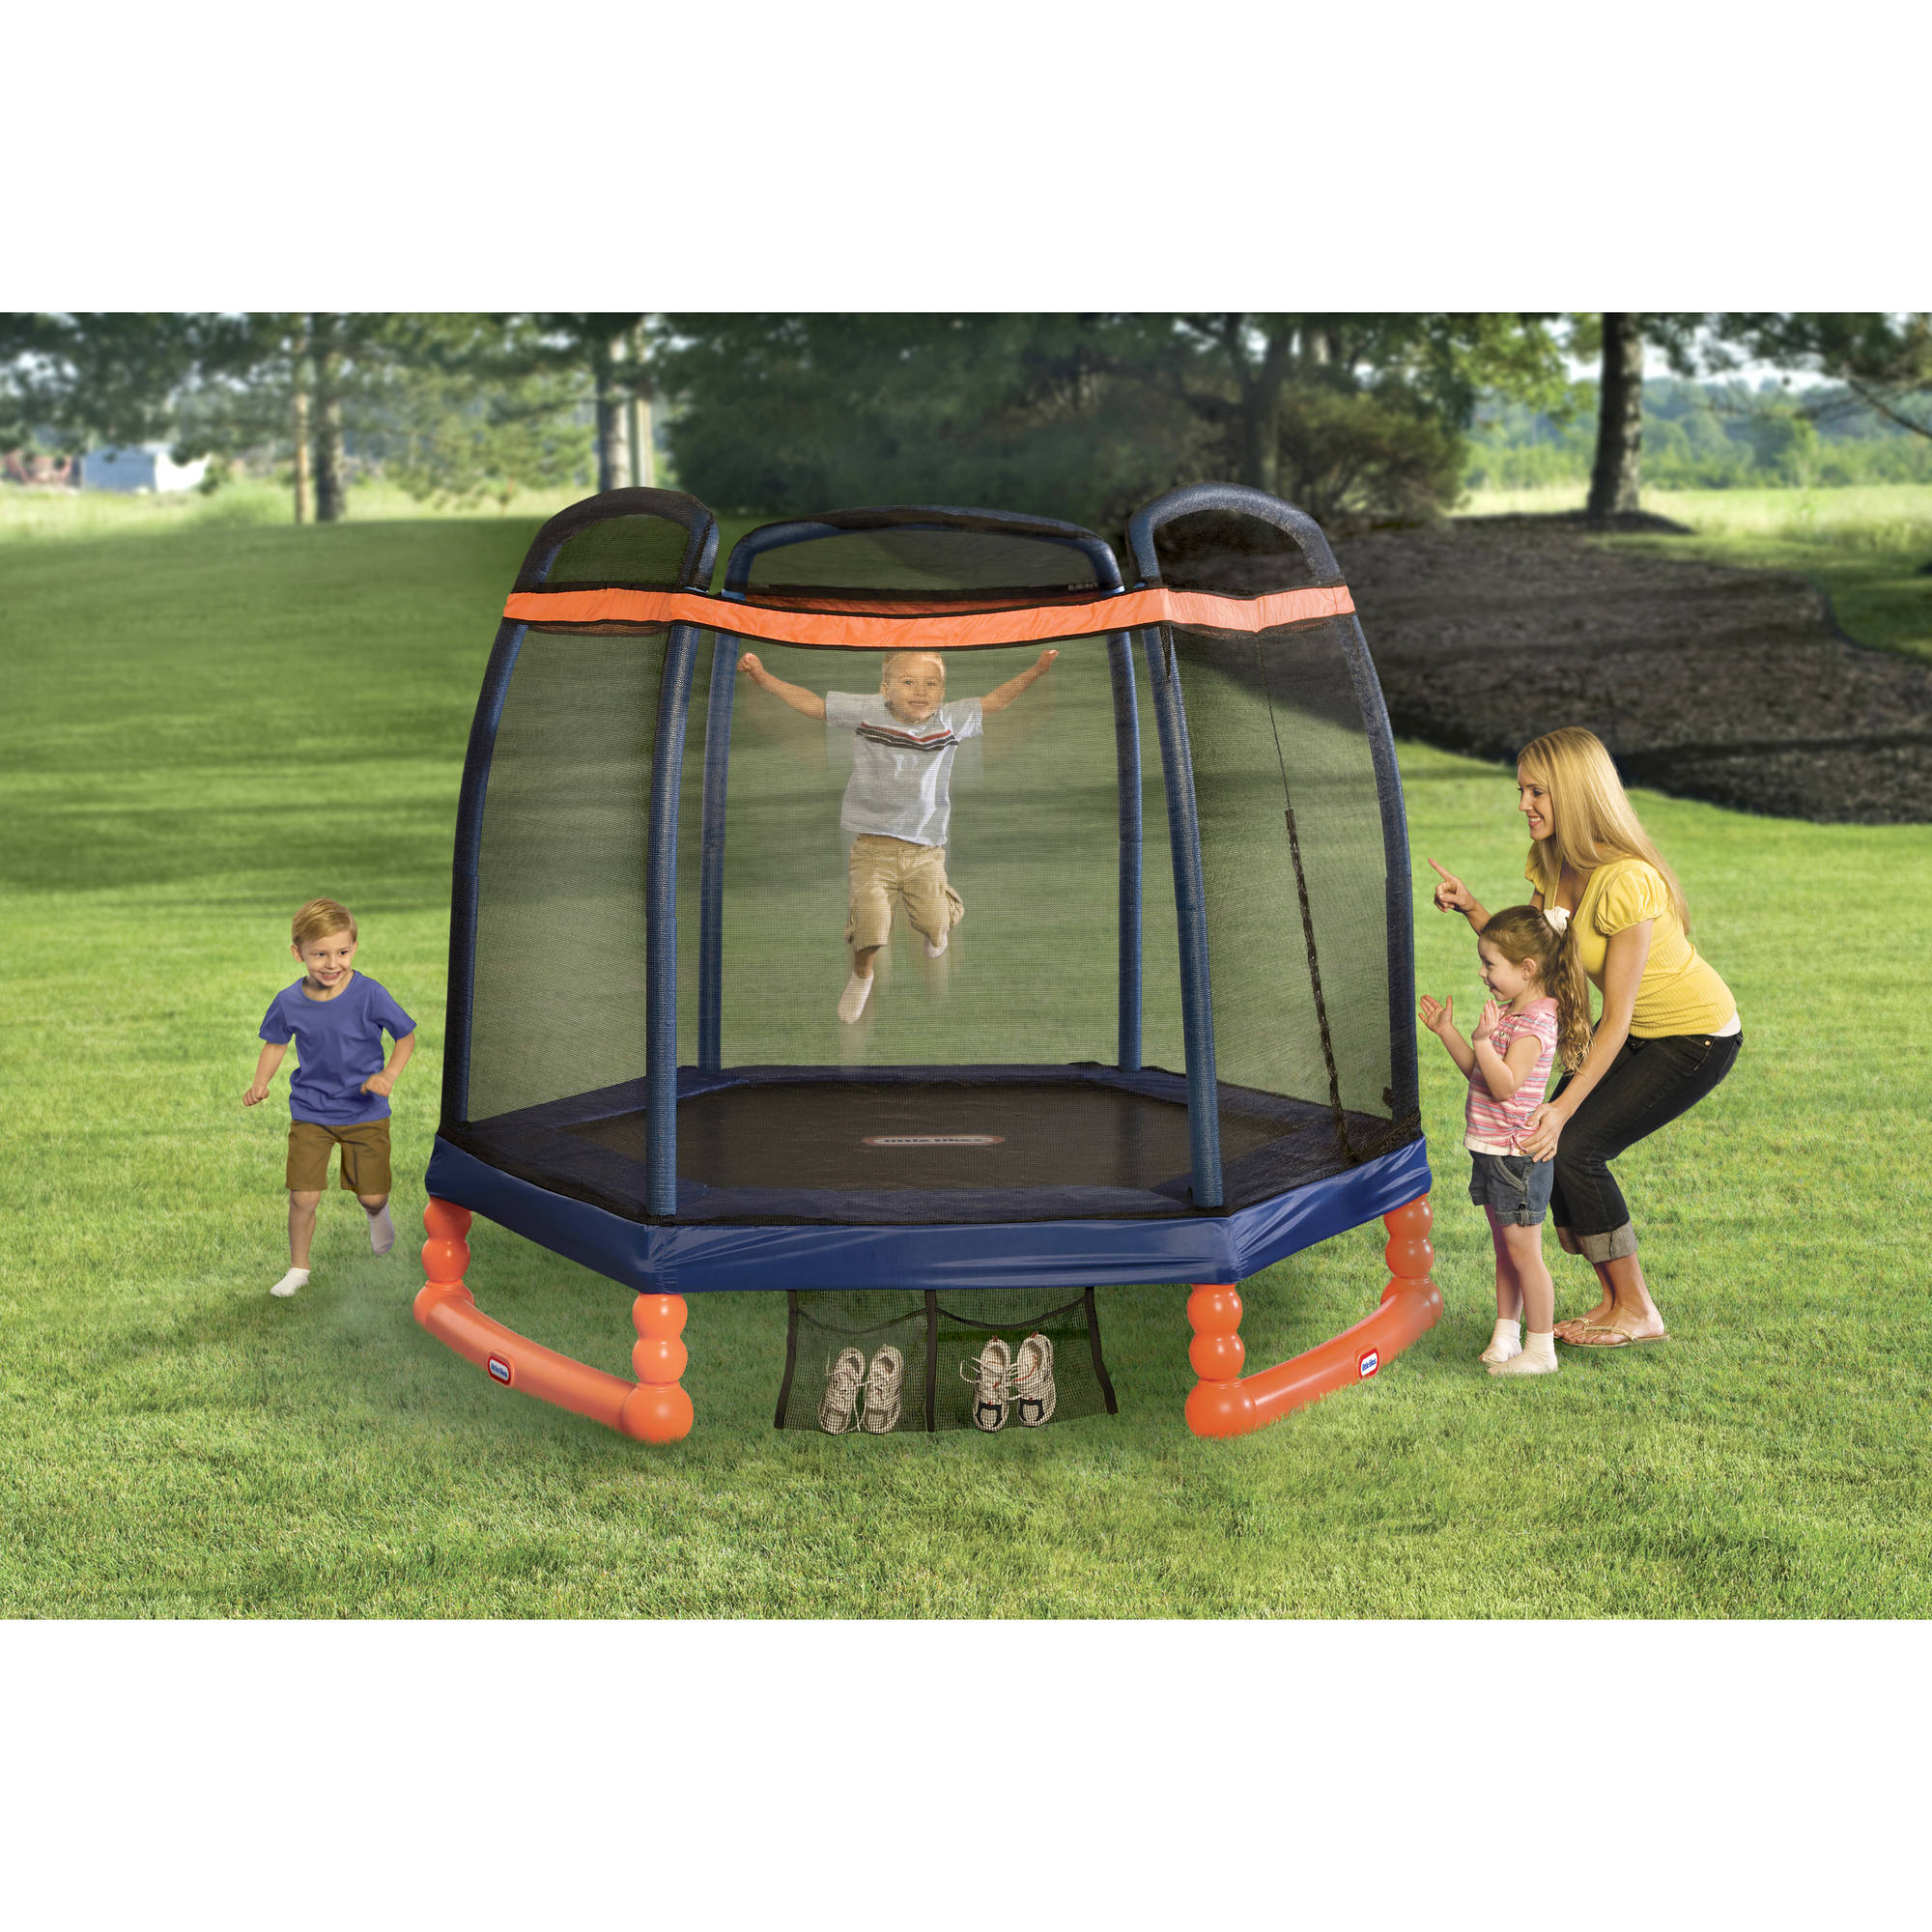 Little Tikes 7-Foot Trampoline, with Enclosure, Blue/Orange - image 3 of 6